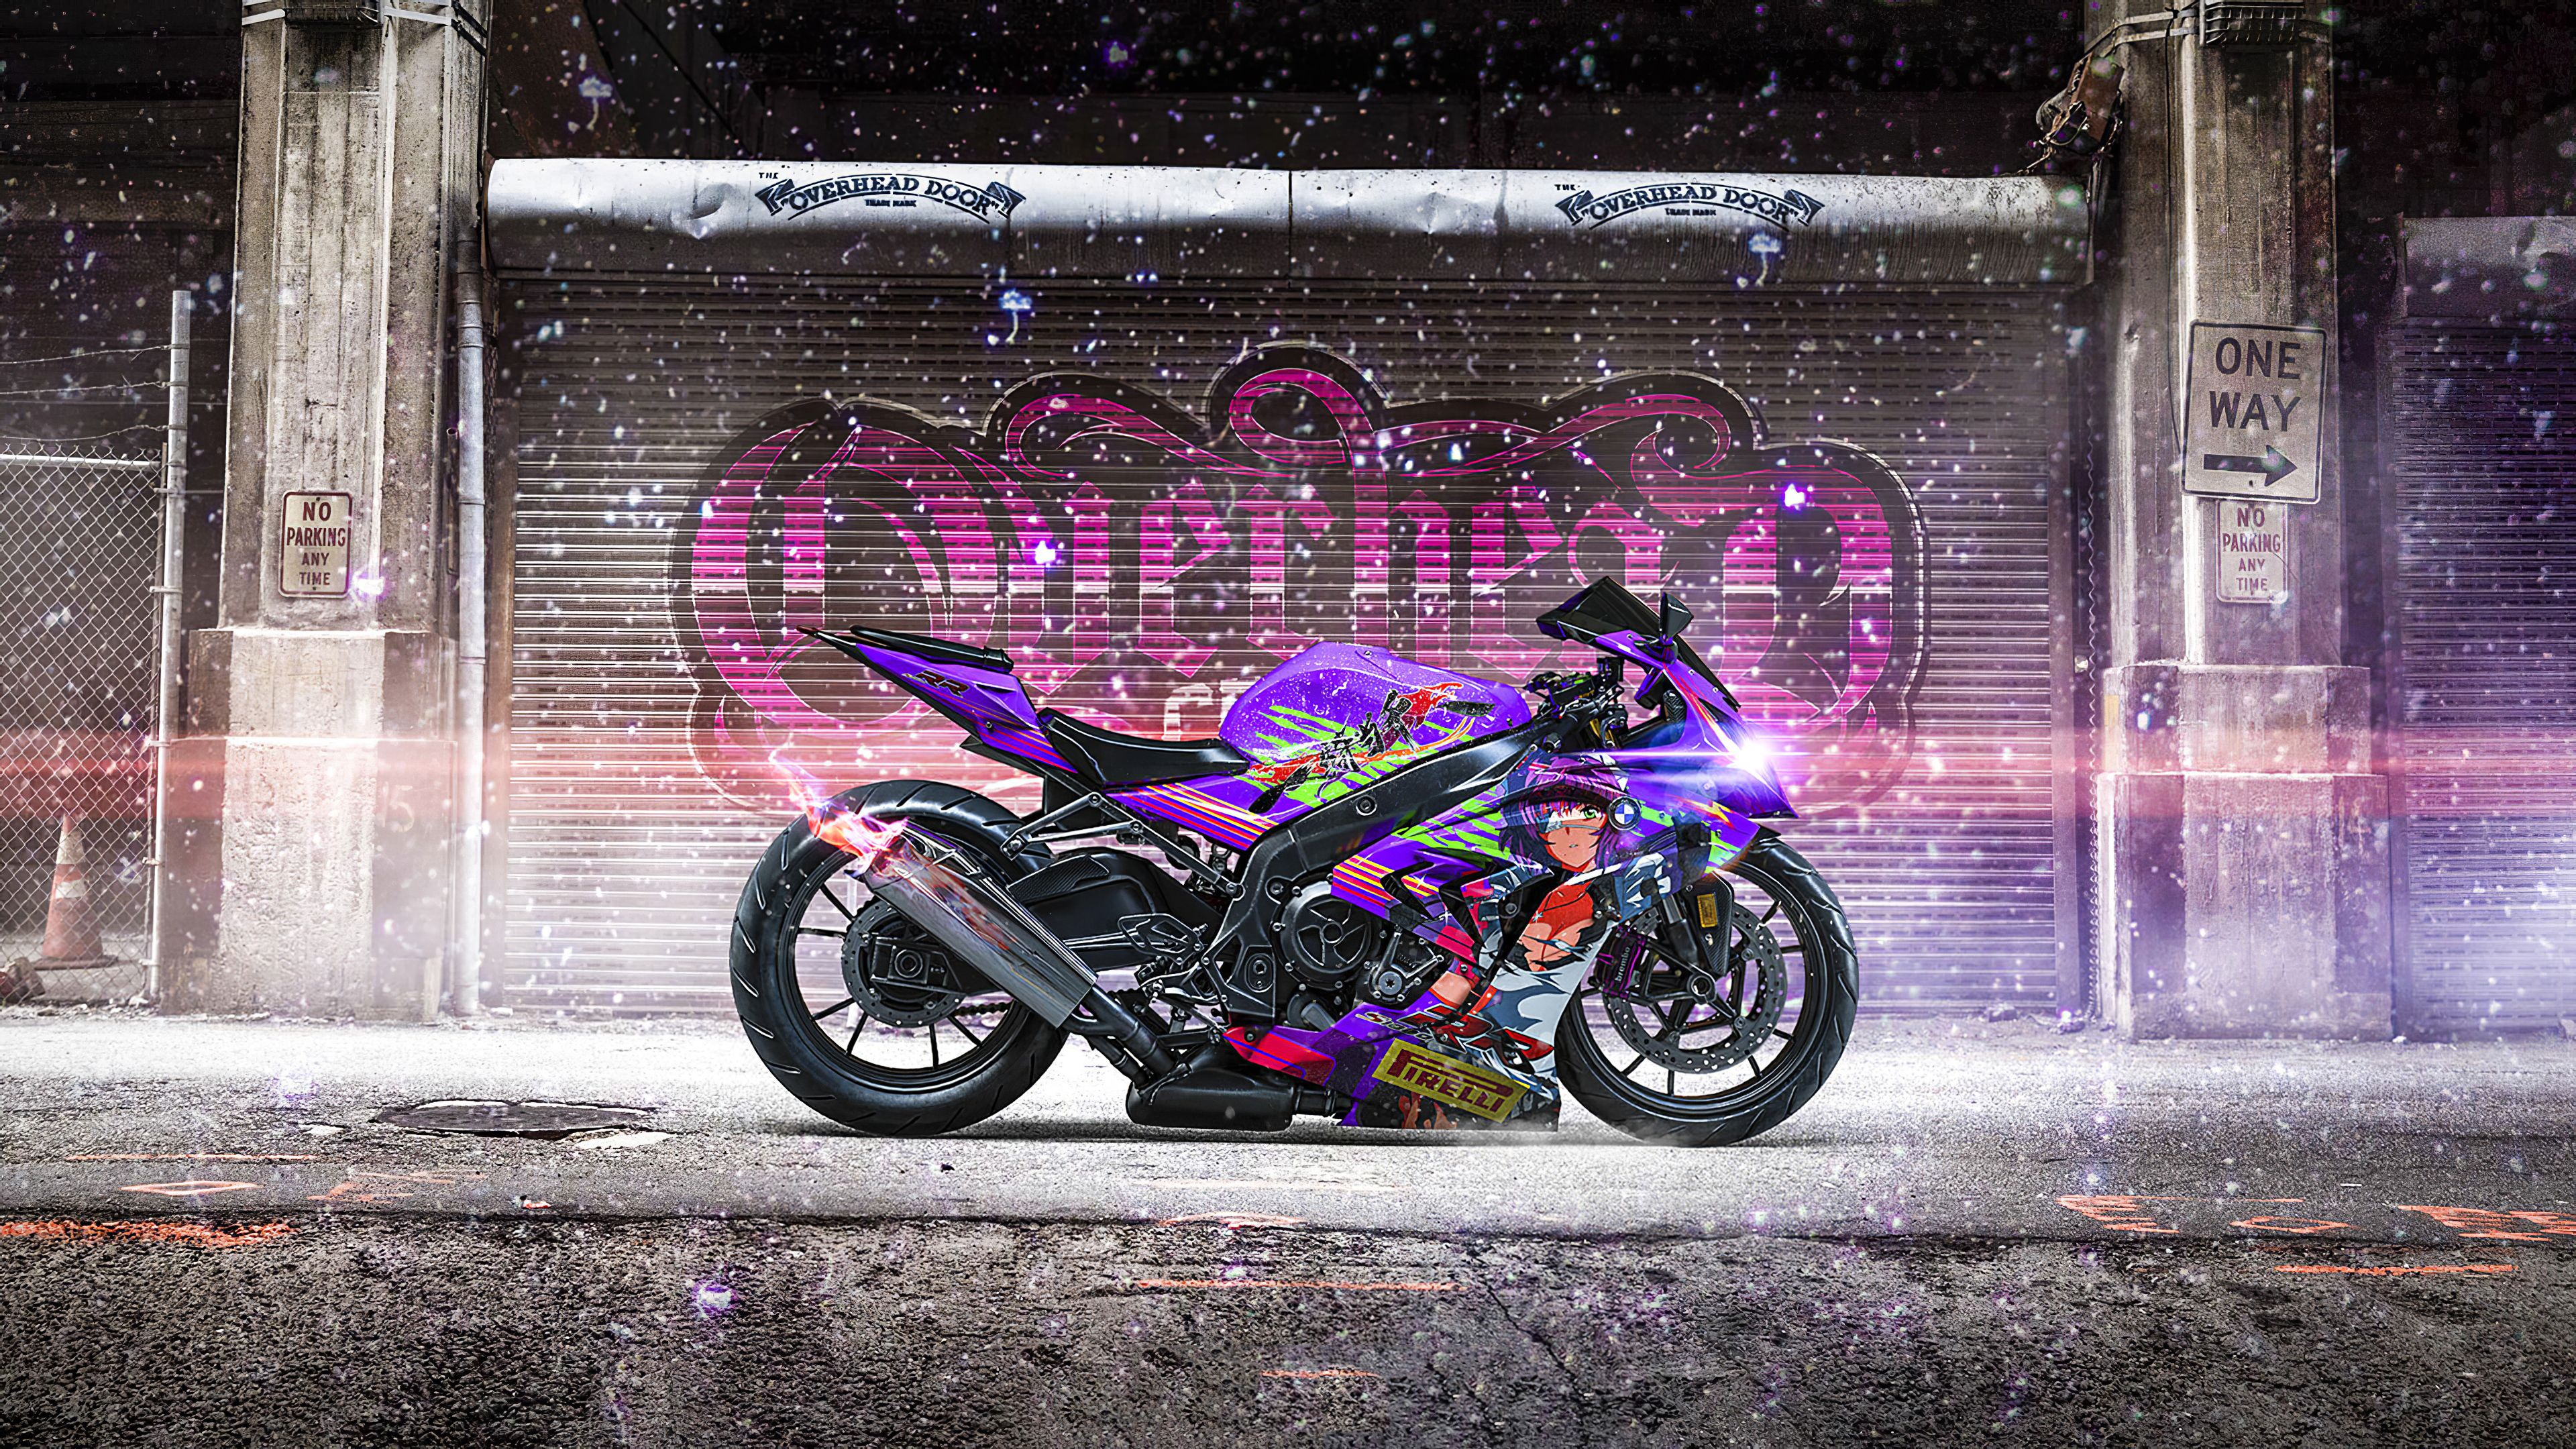 The Bike Wallpapers